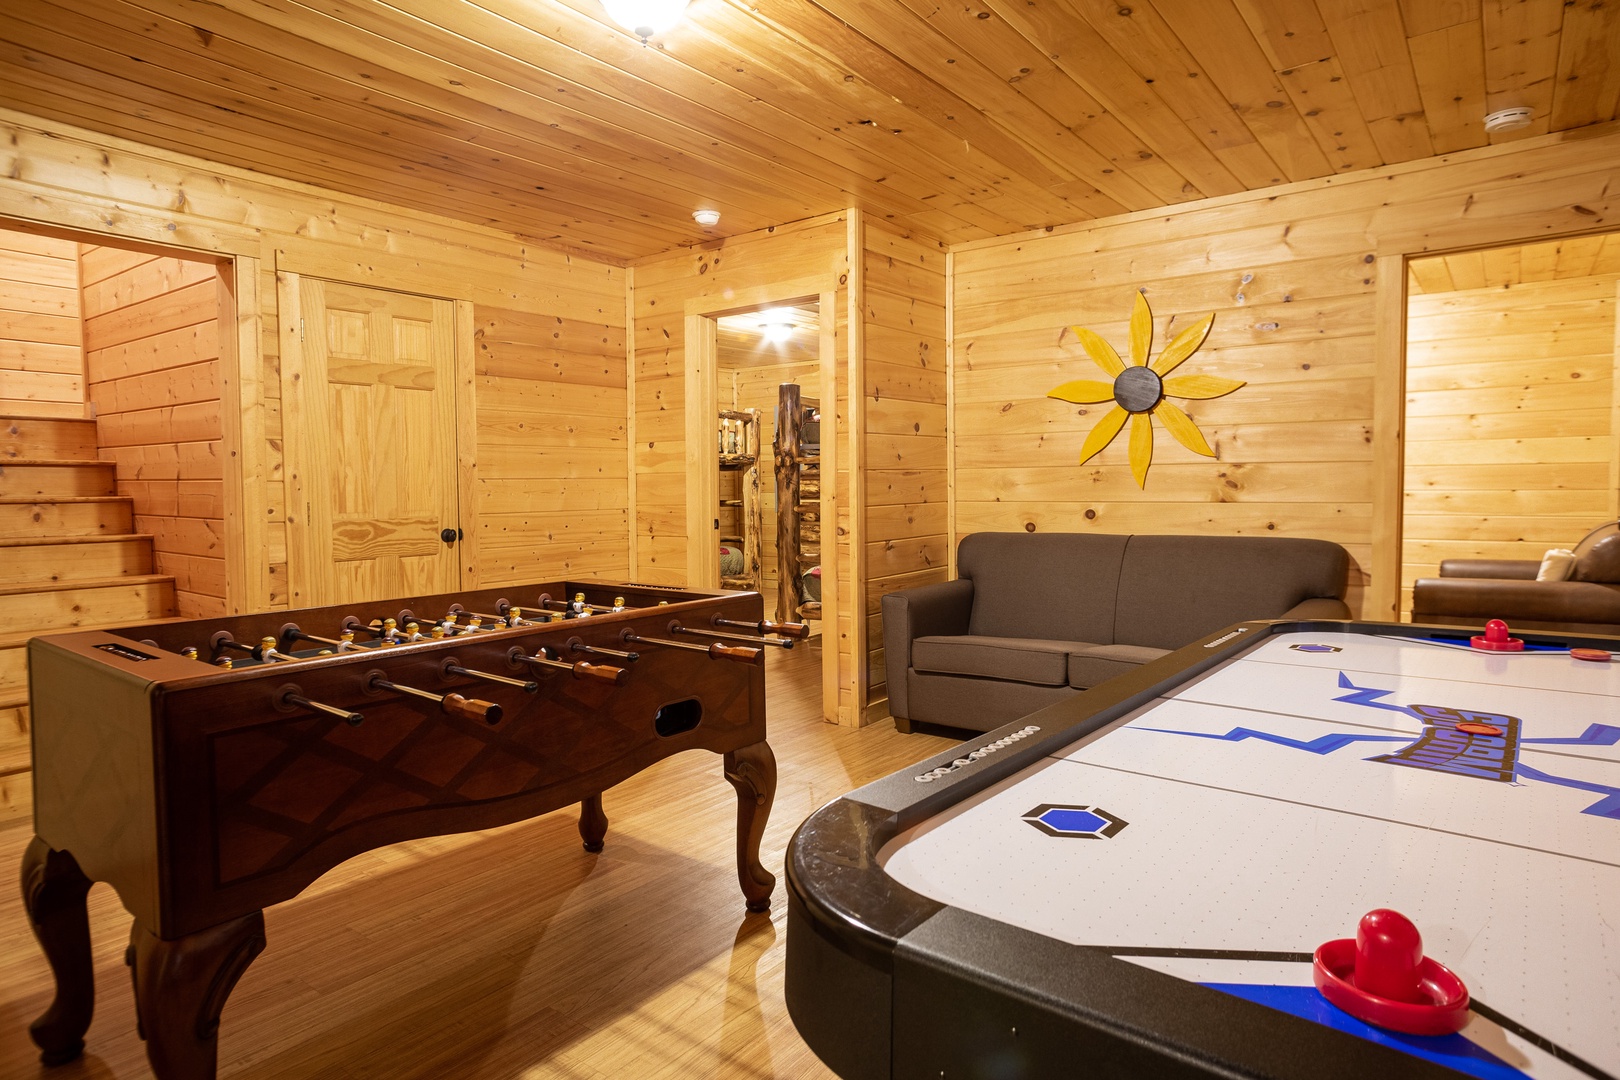 Air Hockey and Foosball Tables at 3 Crazy Cubs, a 5 bedroom cabin rental located in pigeon forge